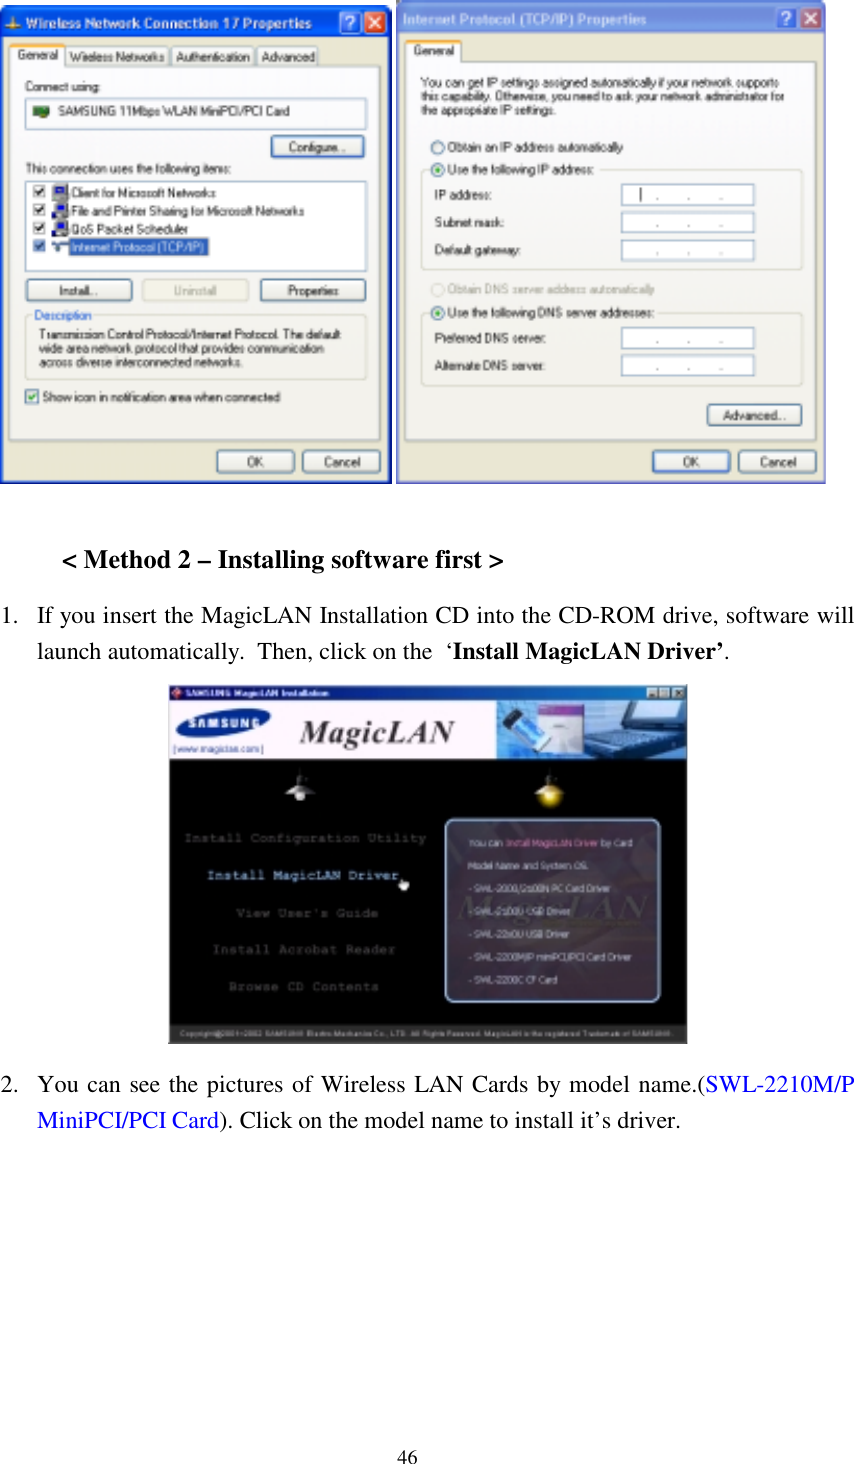  46     &lt; Method 2 – Installing software first &gt; 1.  If you insert the MagicLAN Installation CD into the CD-ROM drive, software will launch automatically.  Then, click on the  ‘Install MagicLAN Driver’.  2. You can see the pictures of Wireless LAN Cards by model name.(SWL-2210M/P MiniPCI/PCI Card). Click on the model name to install it’s driver. 